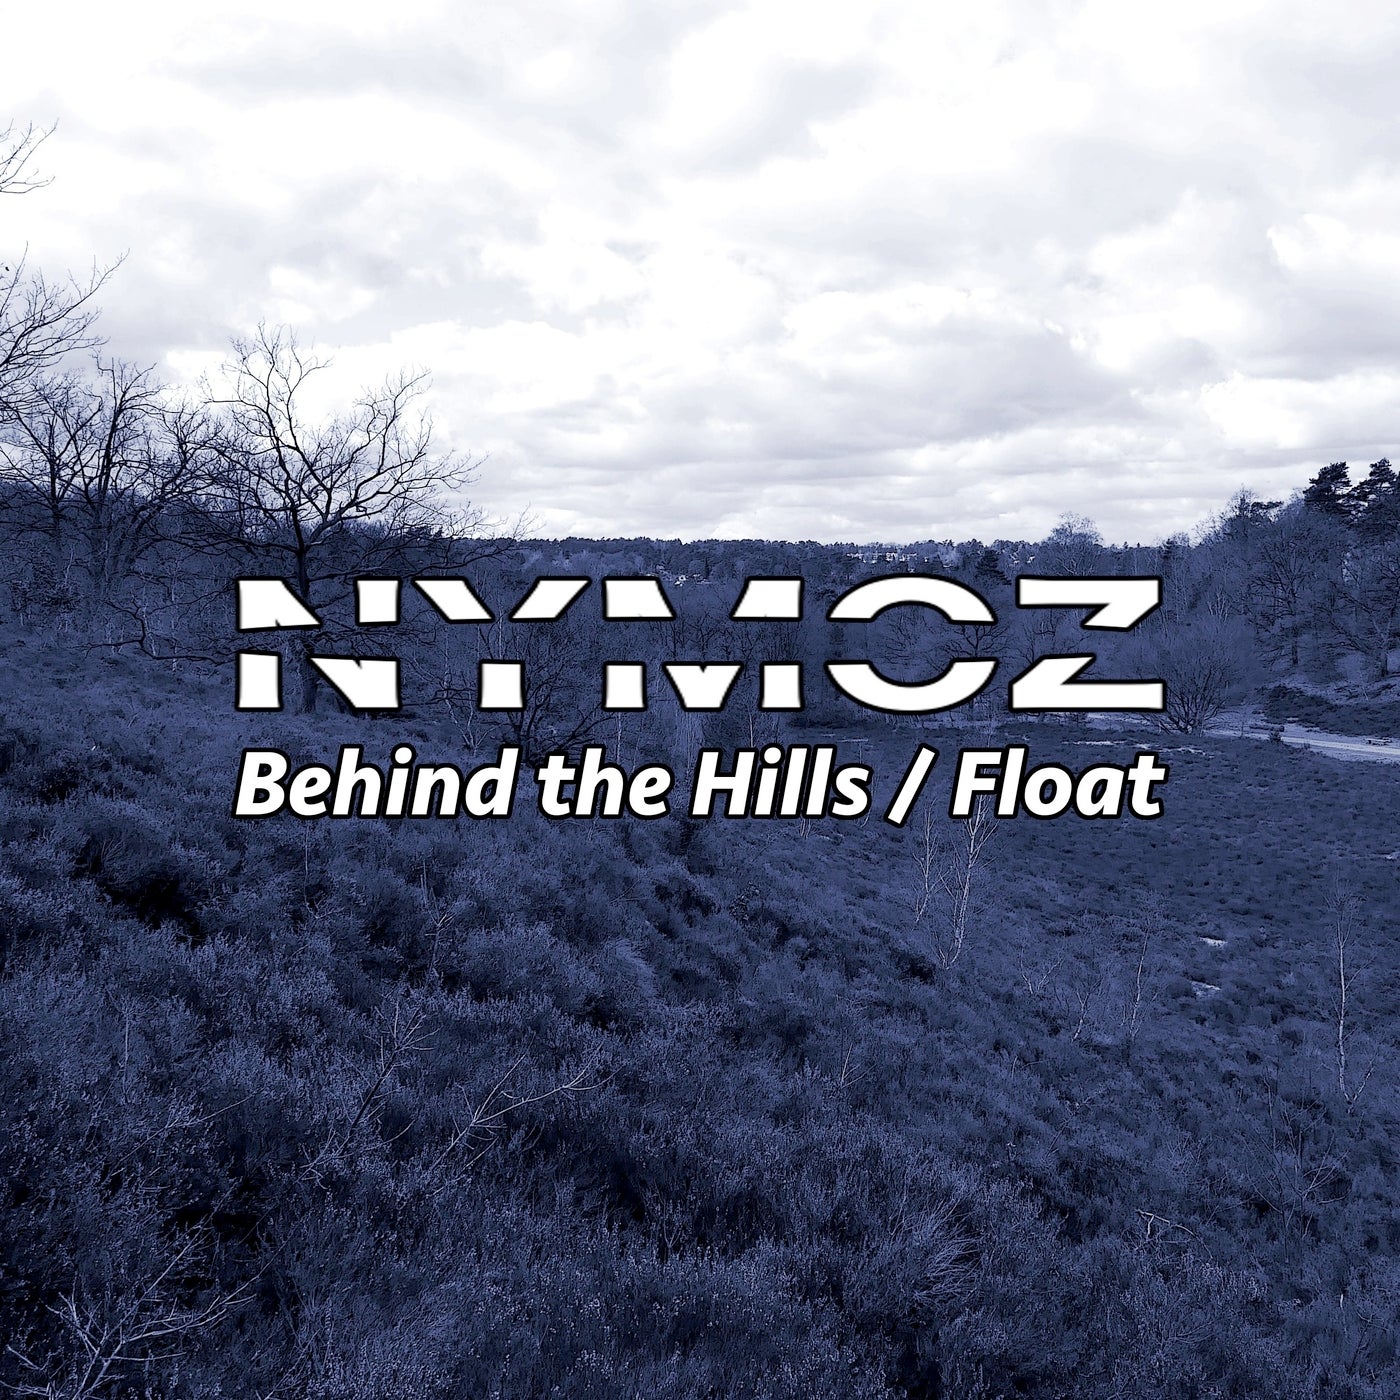 Behind the Hills / Float